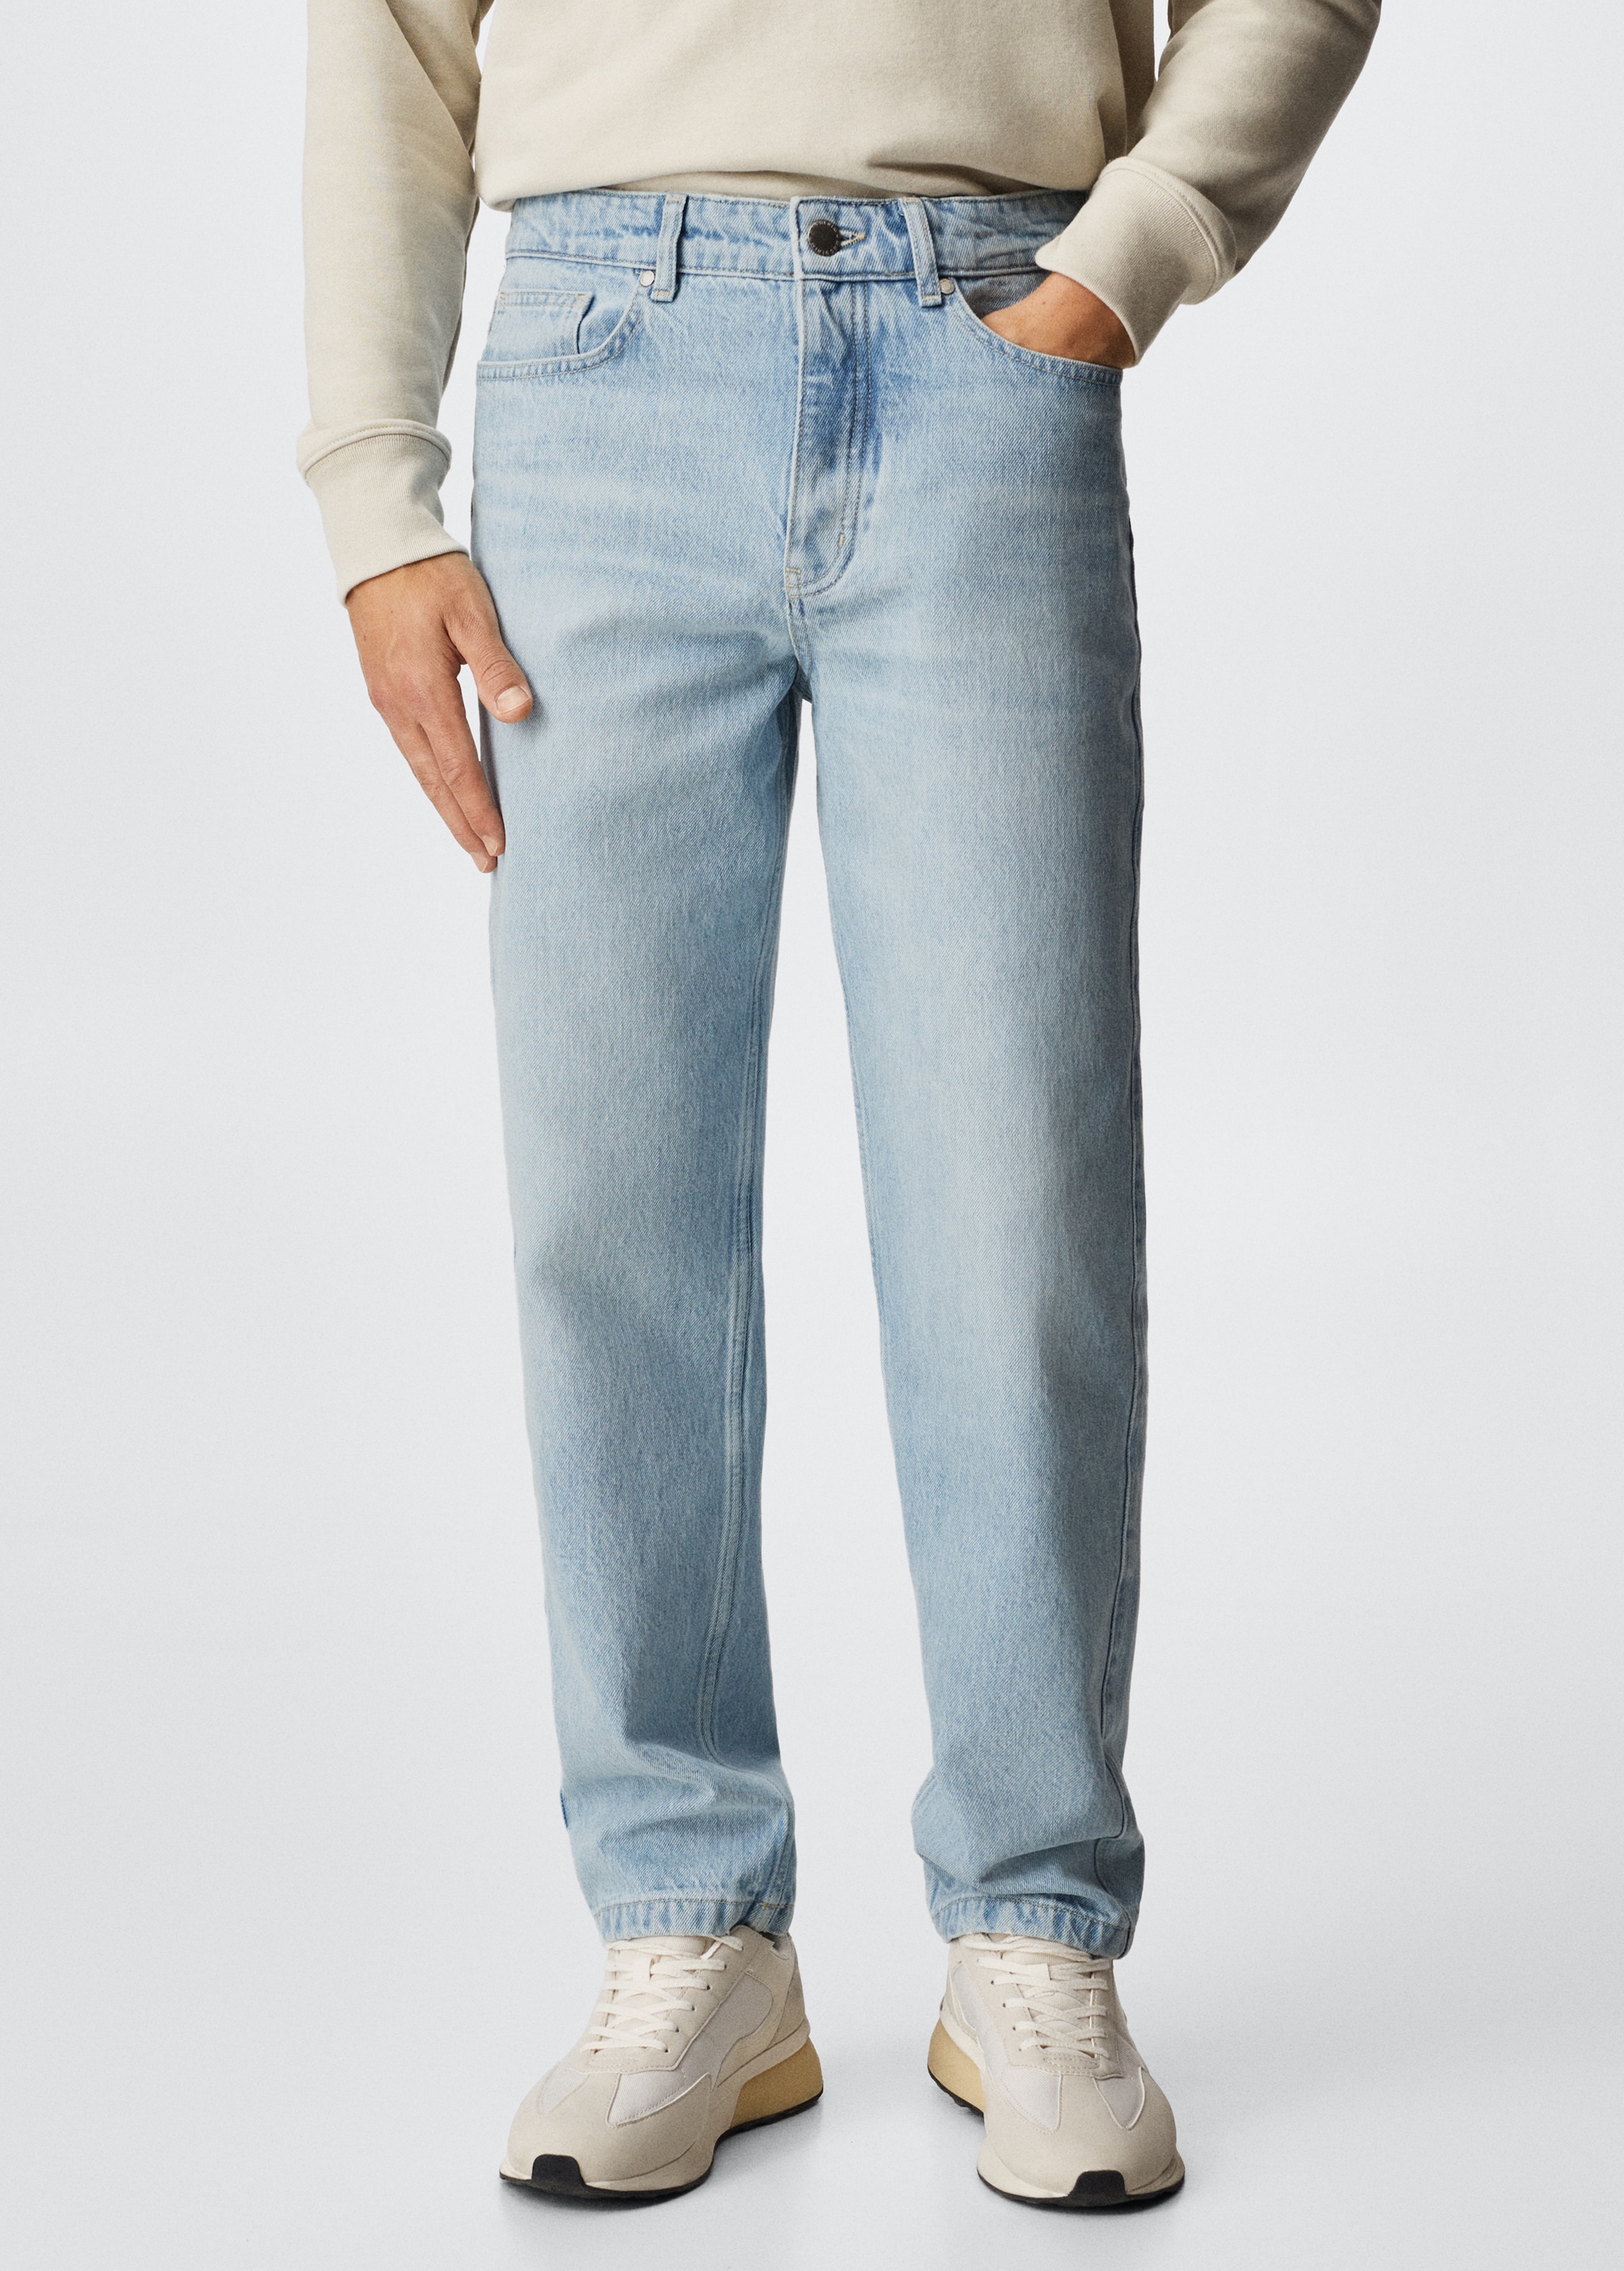 Jeans Hillary loose-fit - Plano medio